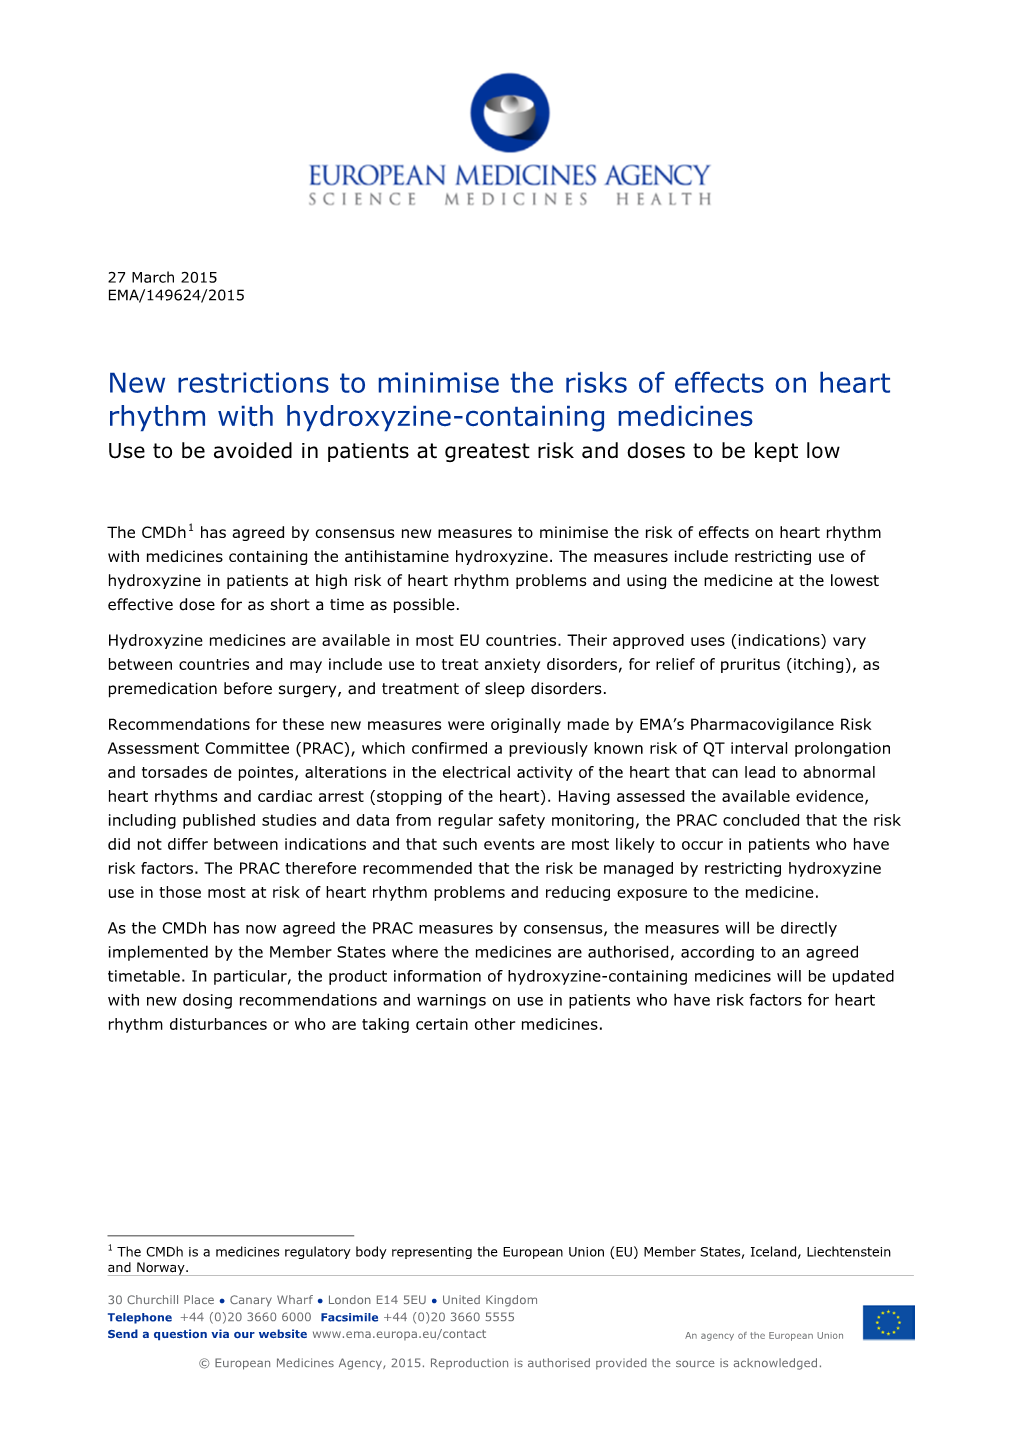 New Restrictions to Minimise the Risks of Effects on Heart Rhythm With